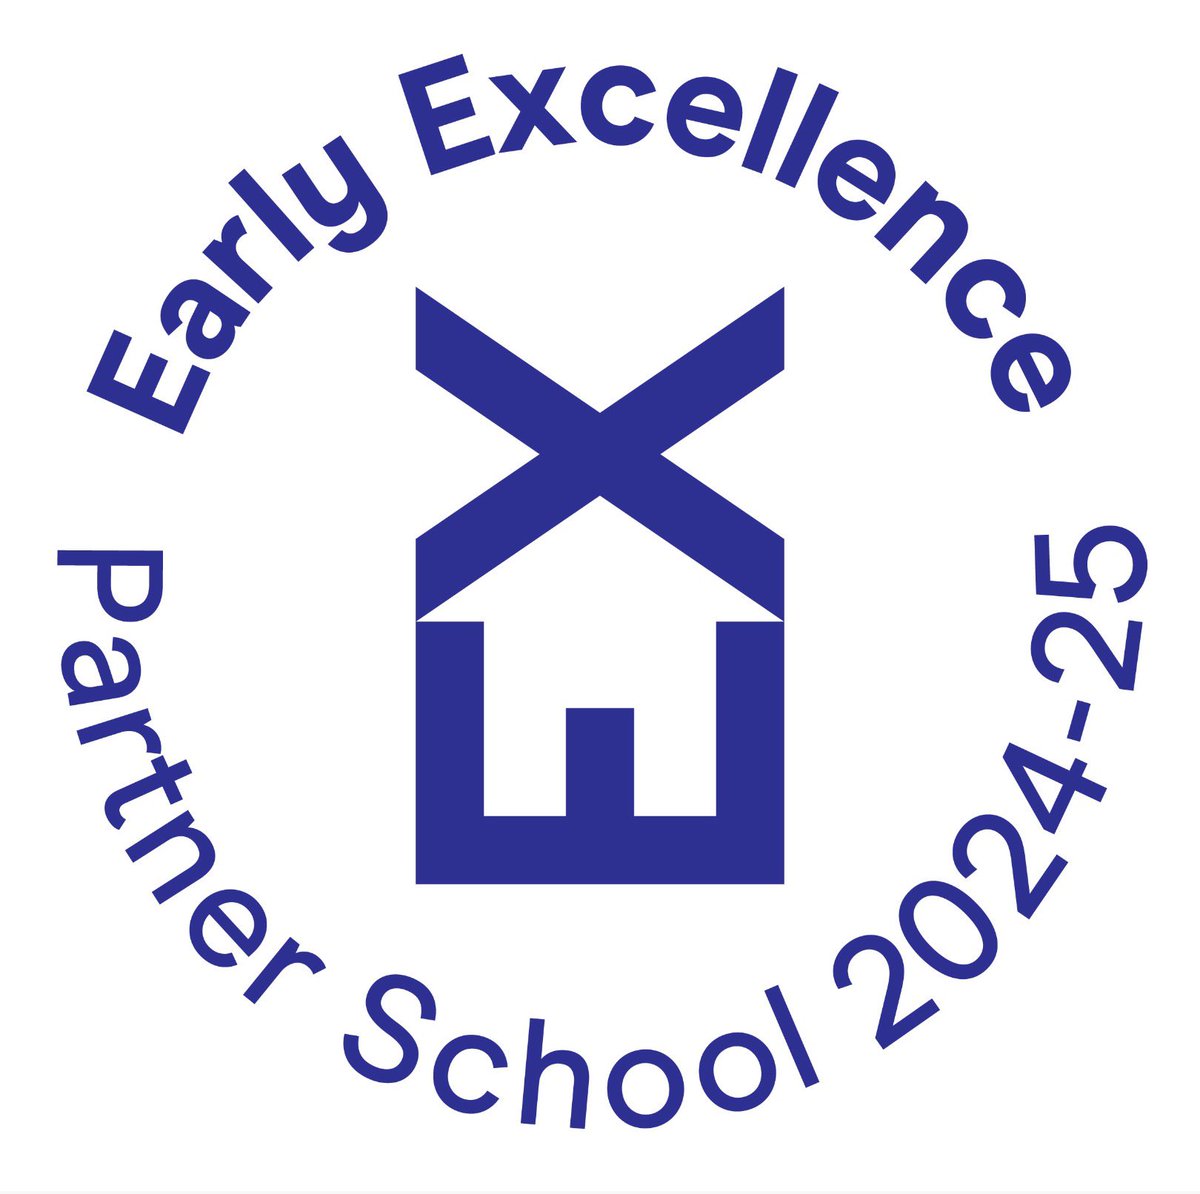 We are so thrilled to be @EarlyExcellence Partner School for the second year running. Bringing superb teacher training opportunities into our local area.